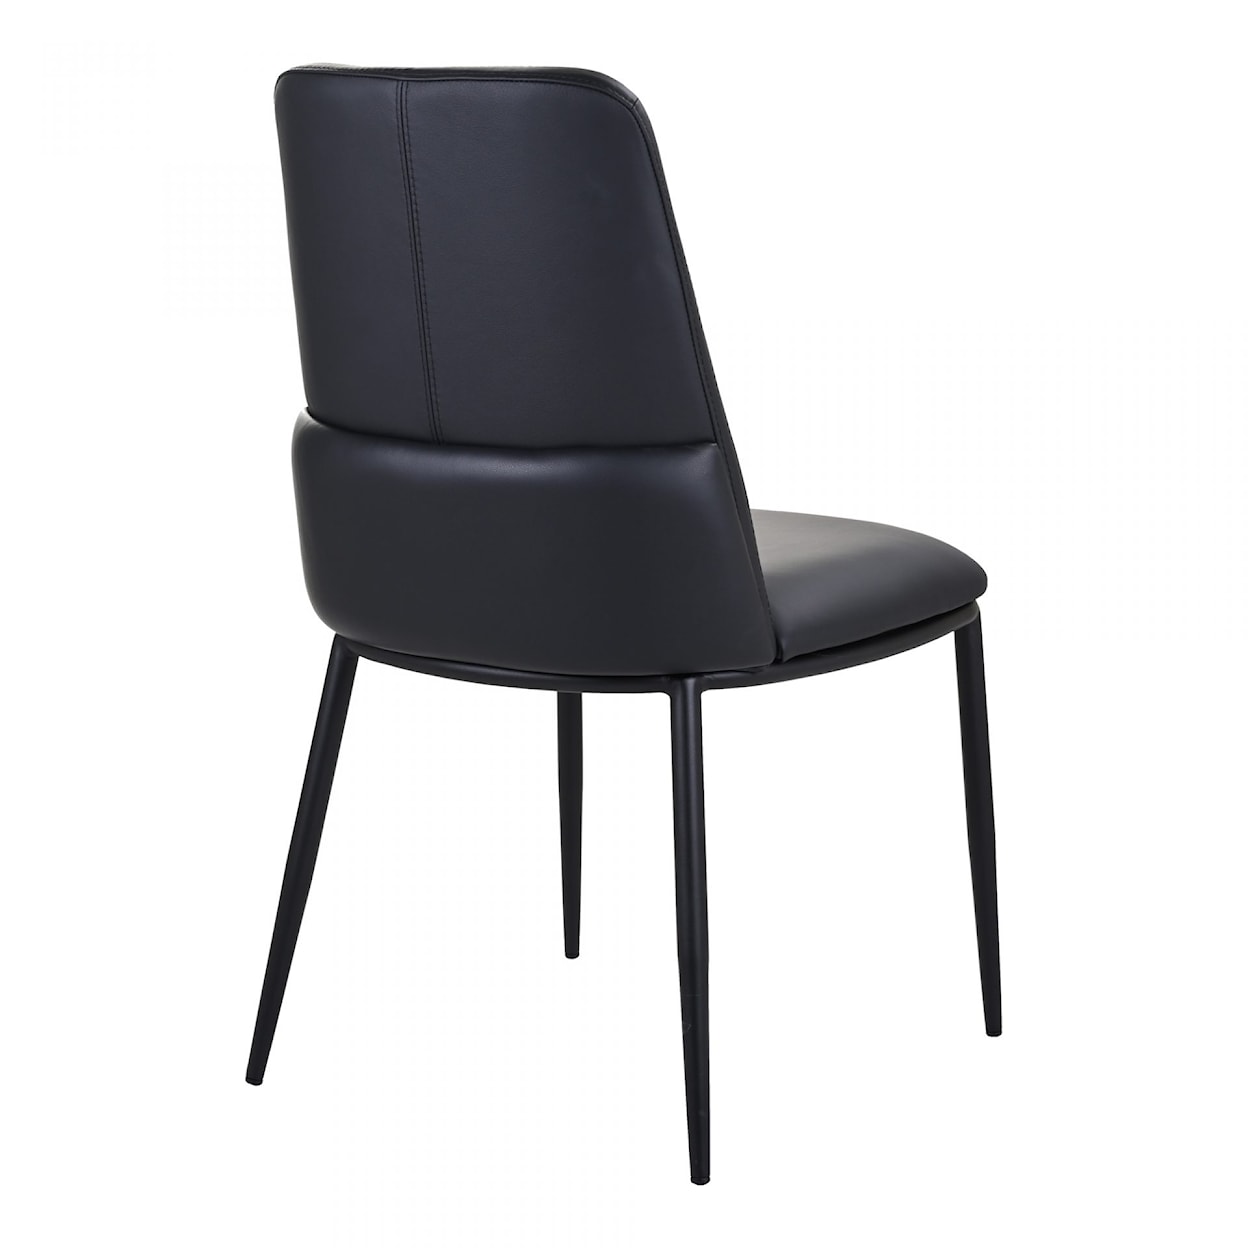 Moe's Home Collection Douglas Dining Chair Black